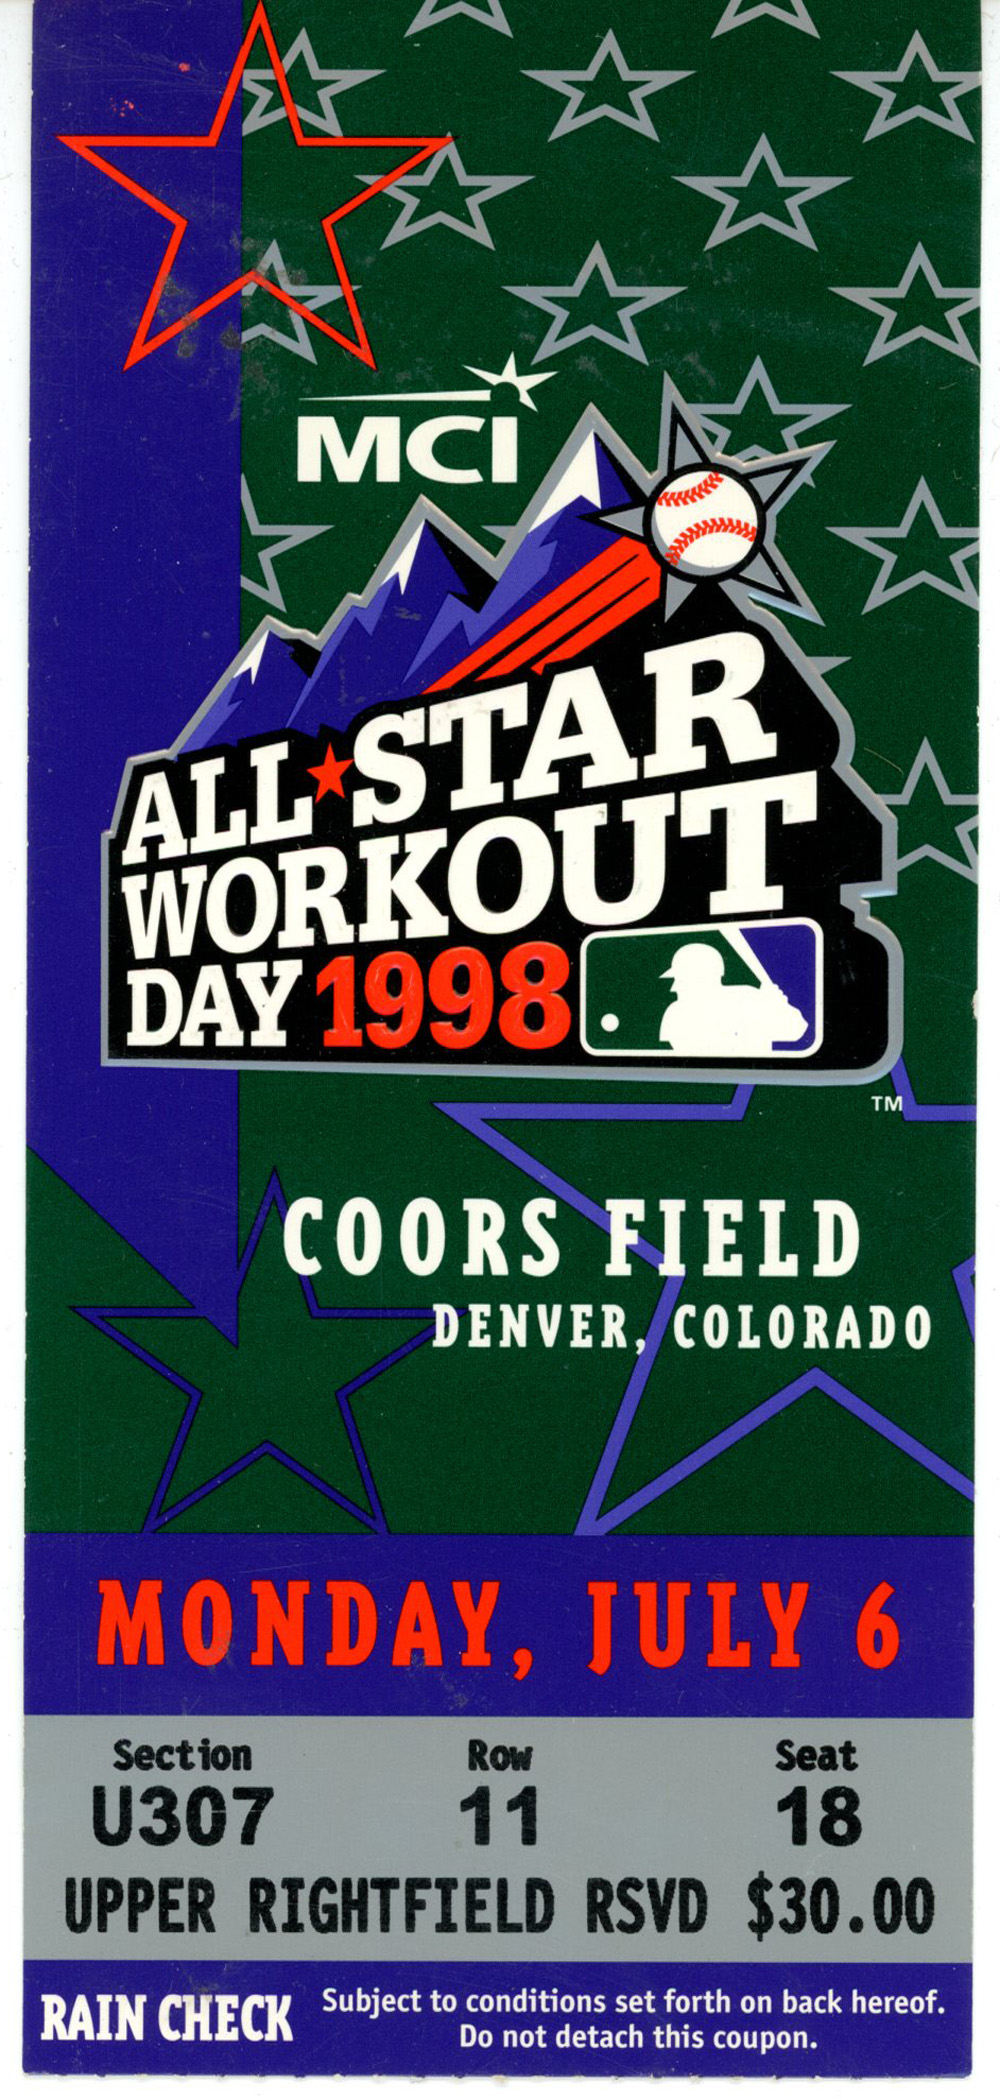 1998 All Star Workout Day Ticket Stub At Coors Field